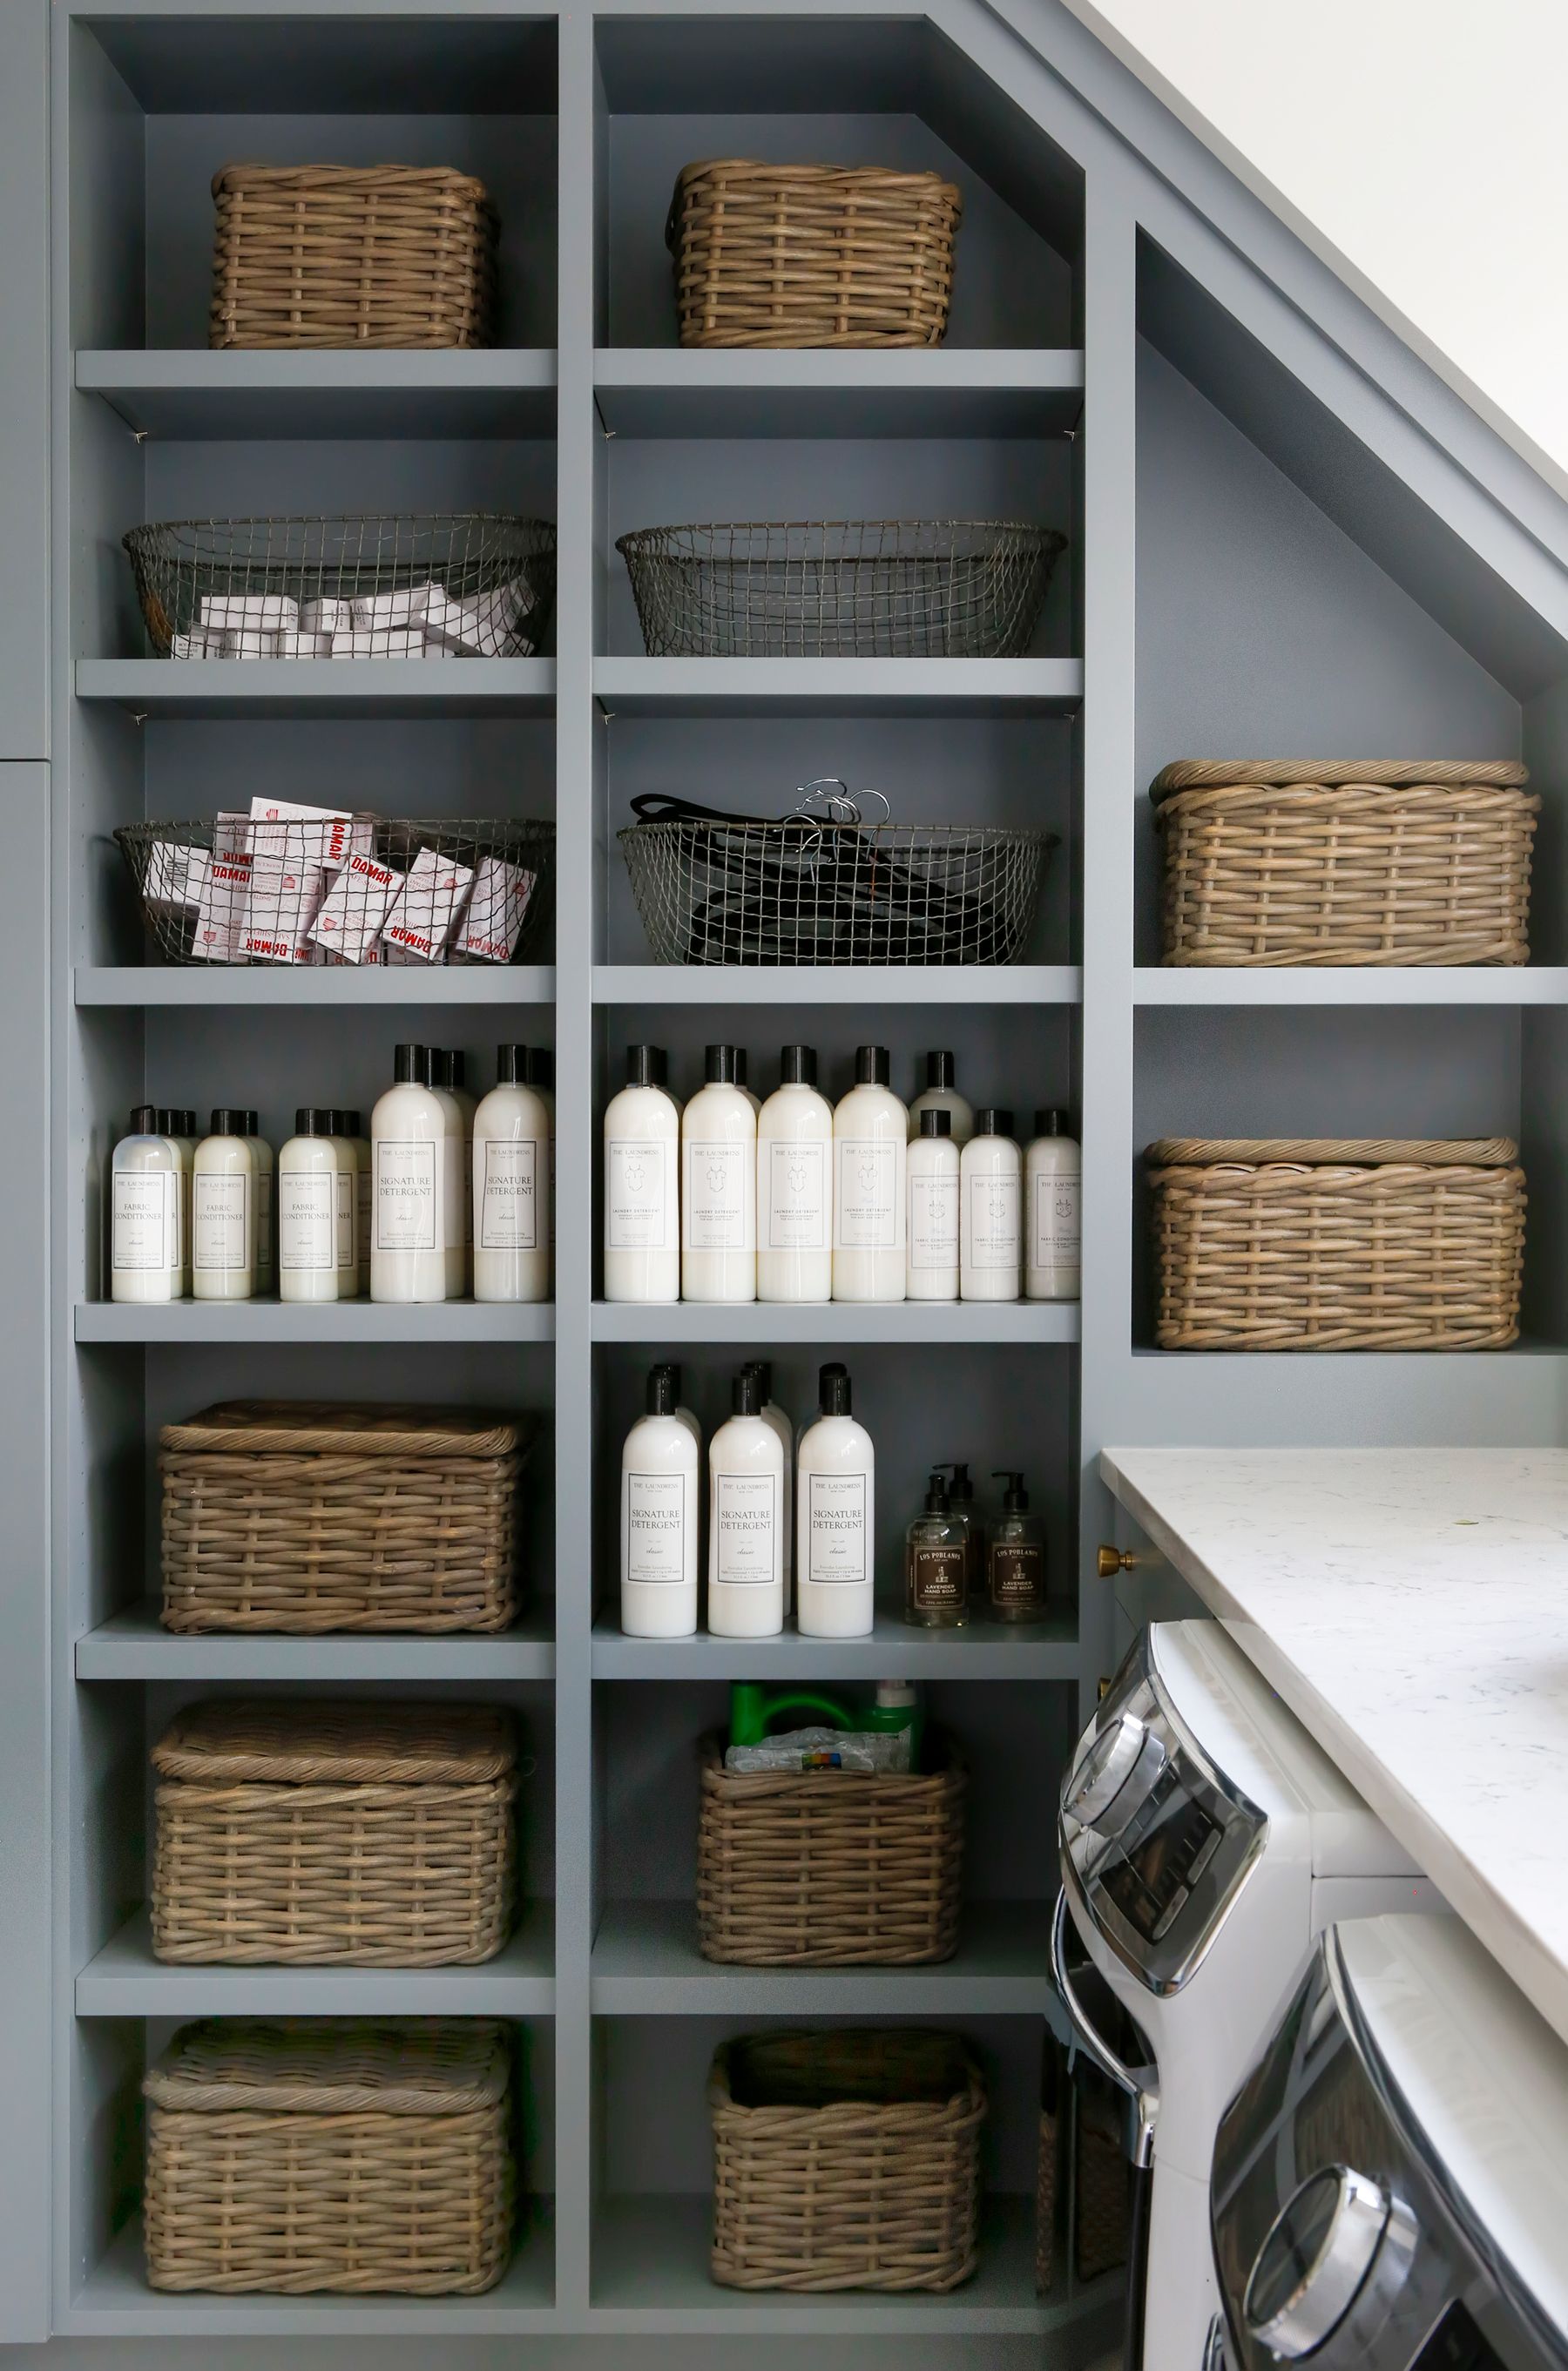 Space Saving Racks Adding Eco Accents to Laundry Room Design